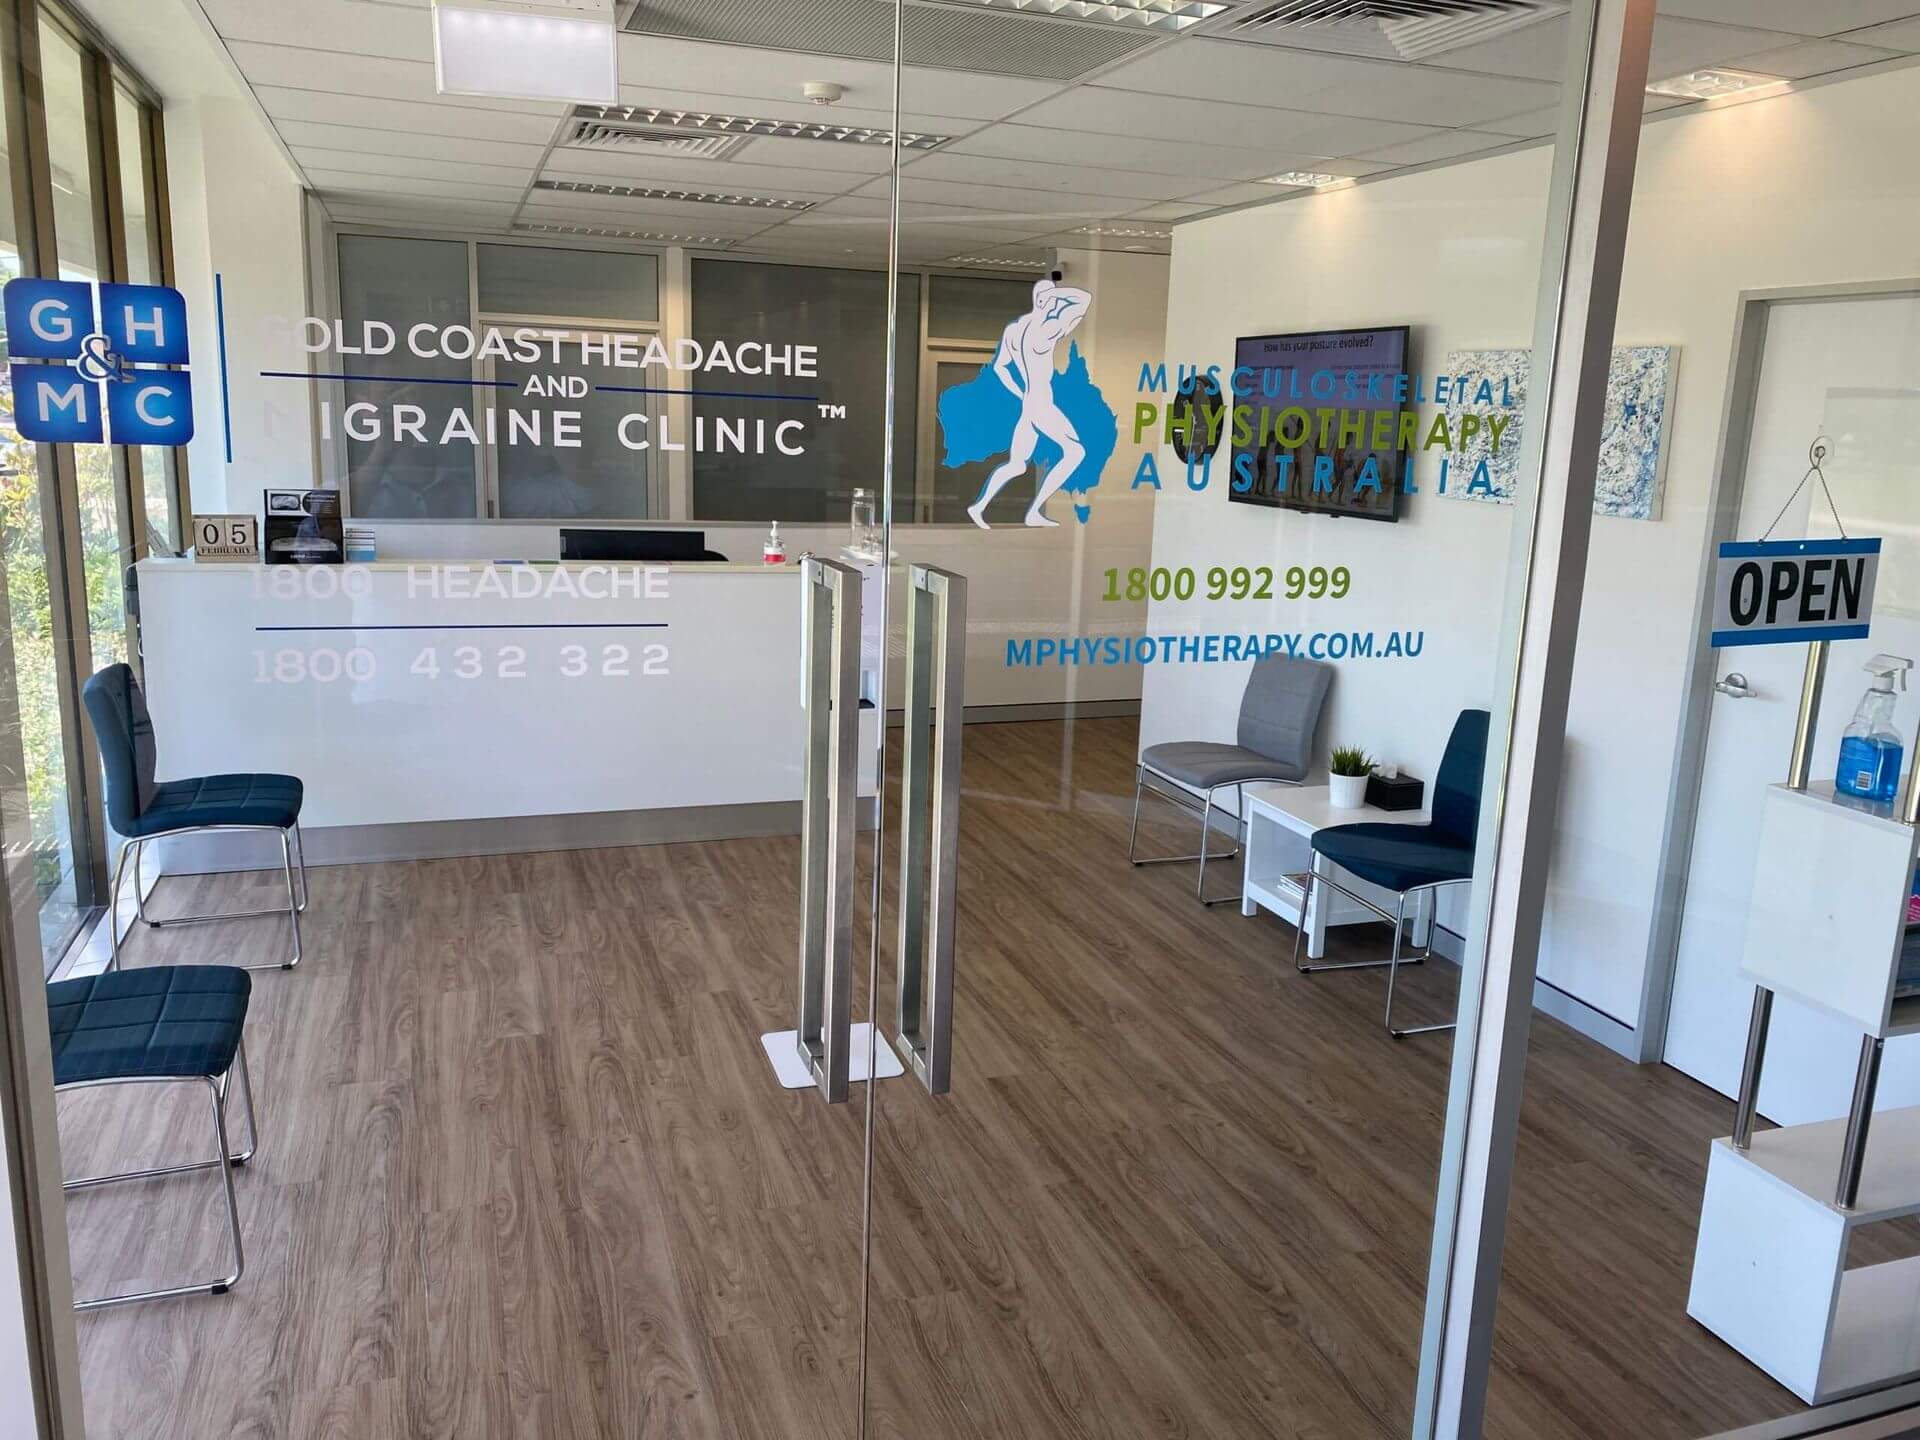 Musculoskeletal Physiotherapy Australia - Gold Coast, reception area